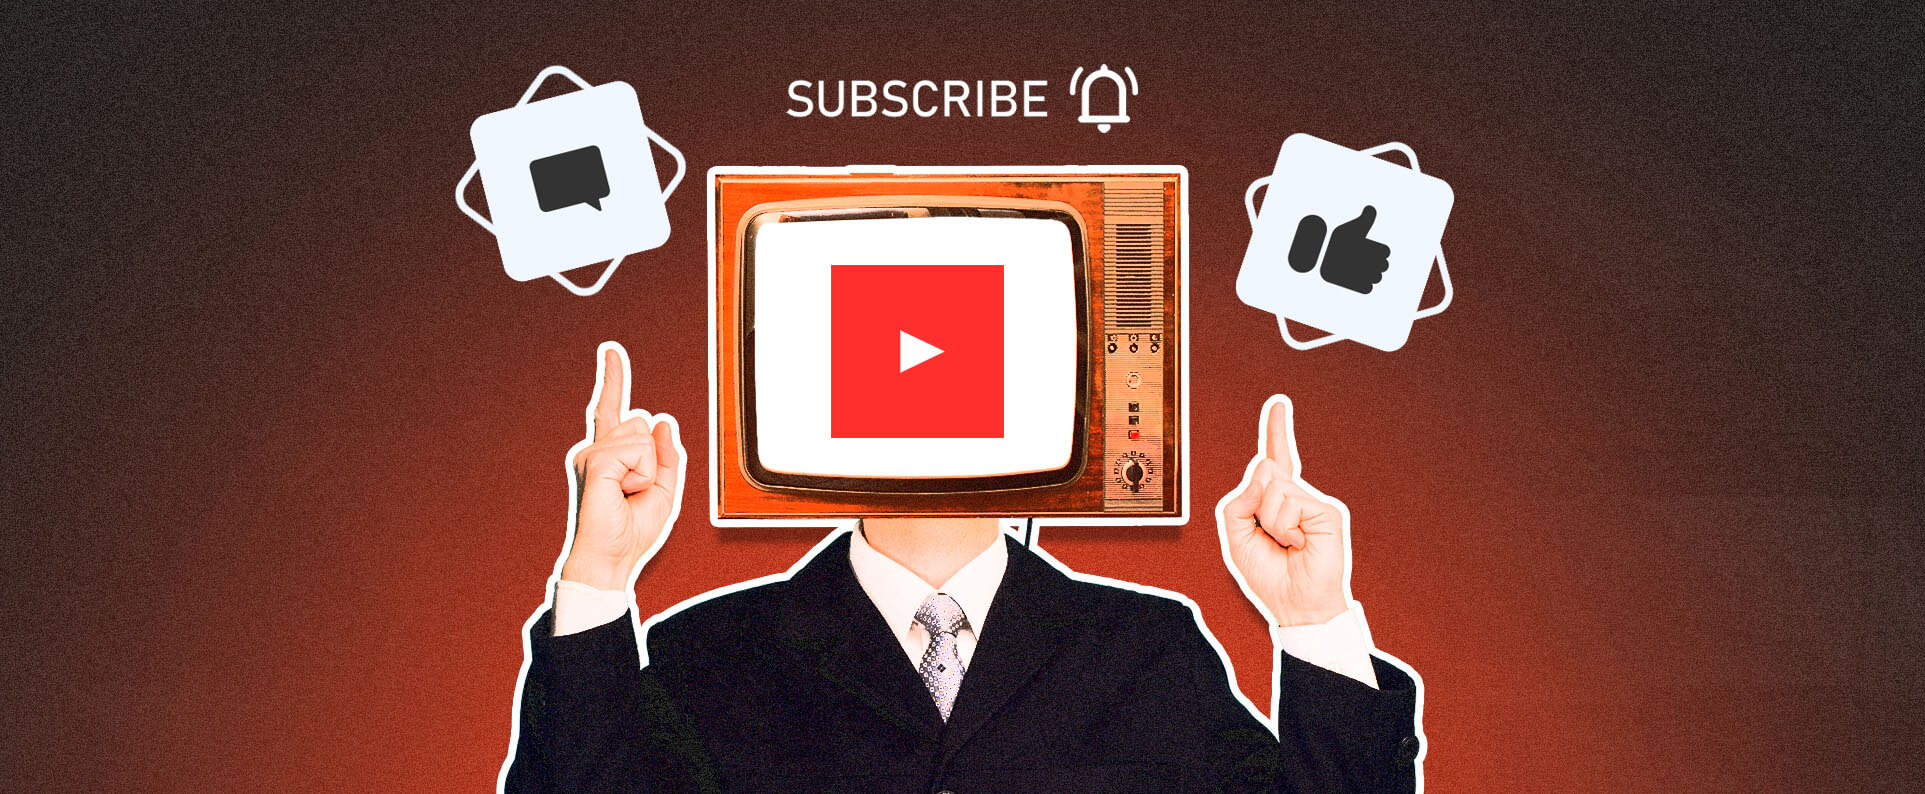 Youtube. Why It Matters and How to Leverage It